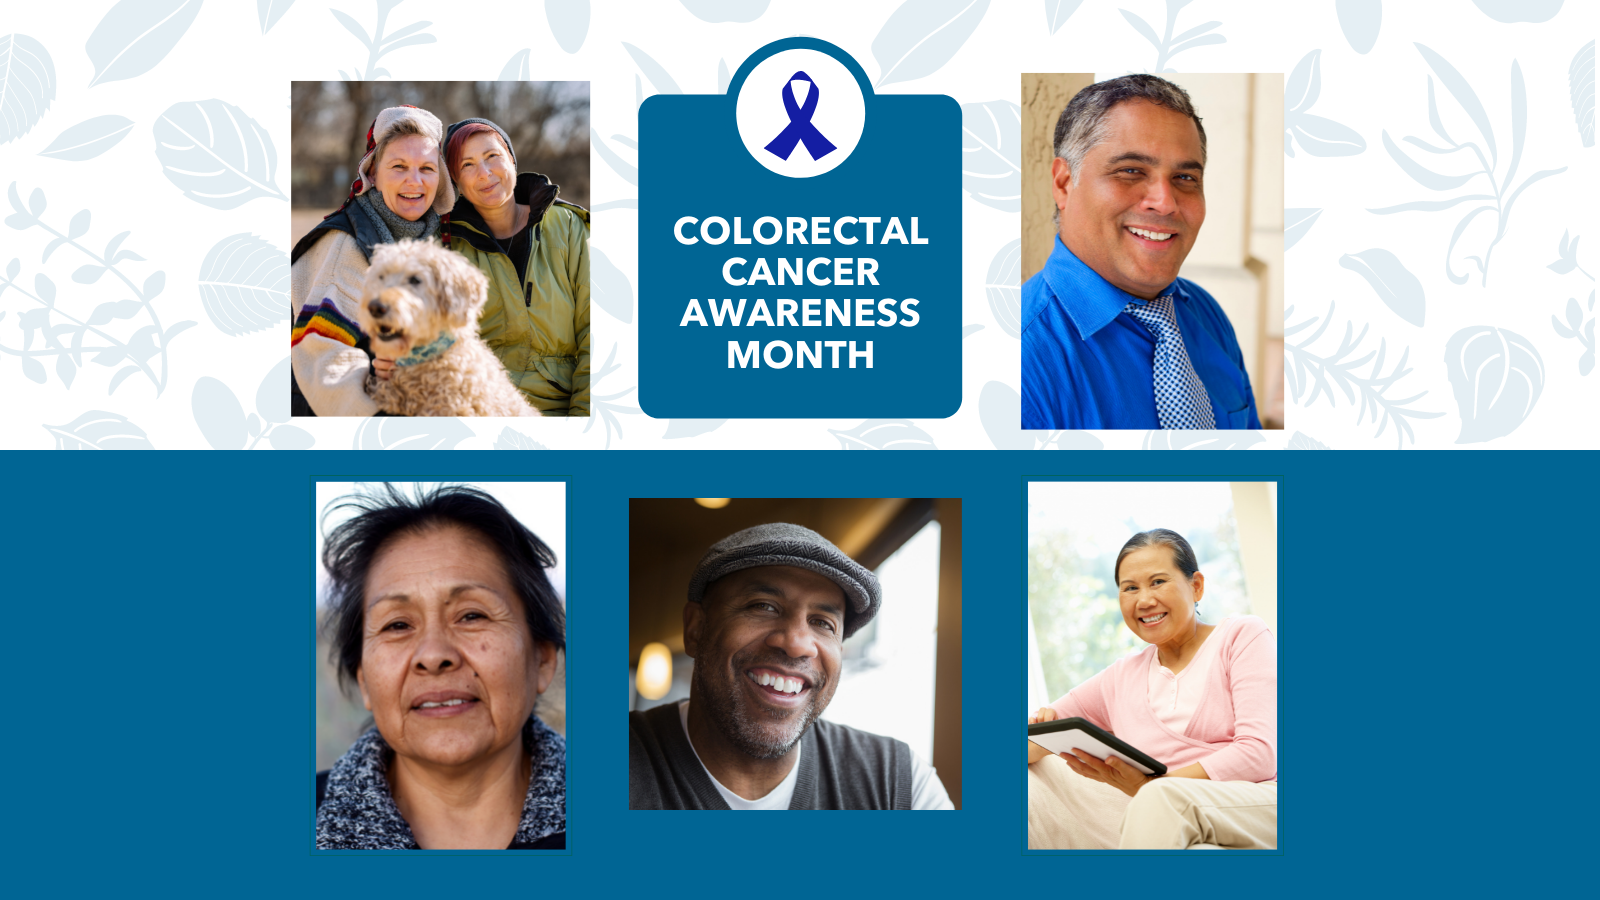 Images of different people of color for colorectal cancer awareness month